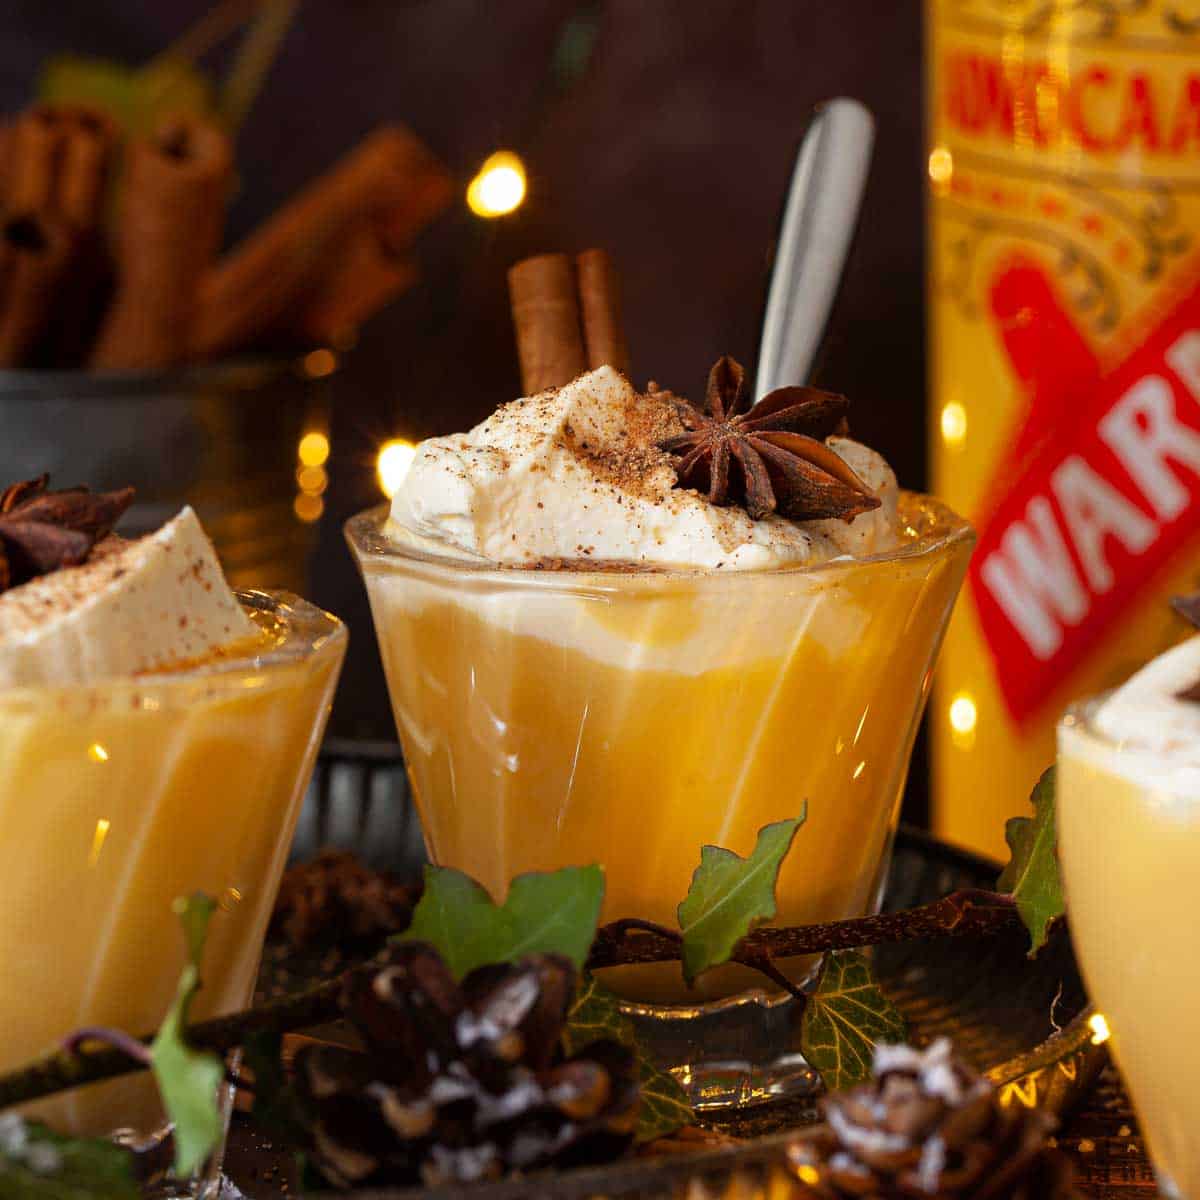 A msall glass of a bombardino drink recipe with advocaat topped with cream.